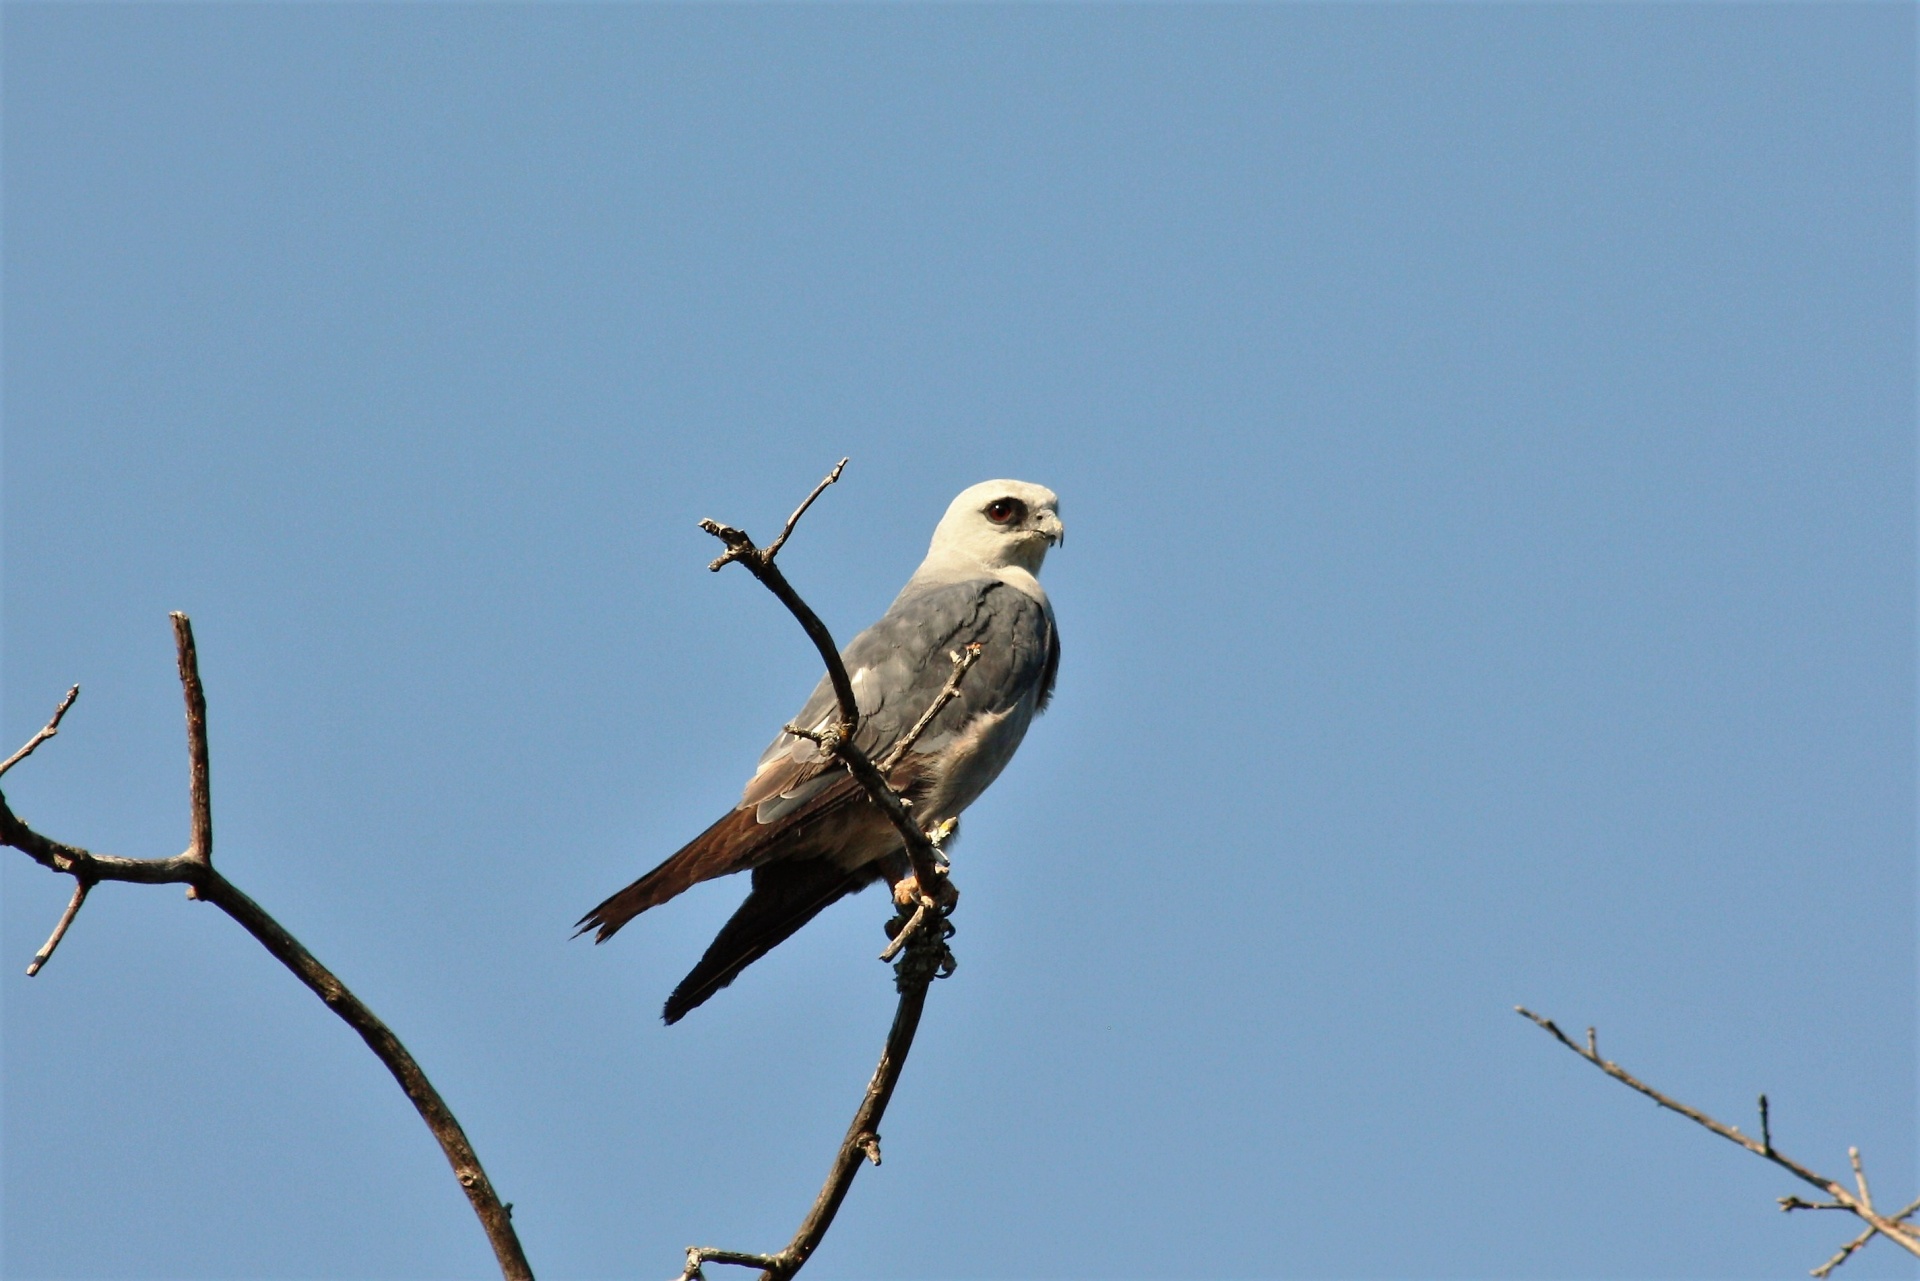 Close-up of a Mississippi Kite bird of prey, sitting on a dead tree branch at the top of a tree with a blue sky background.